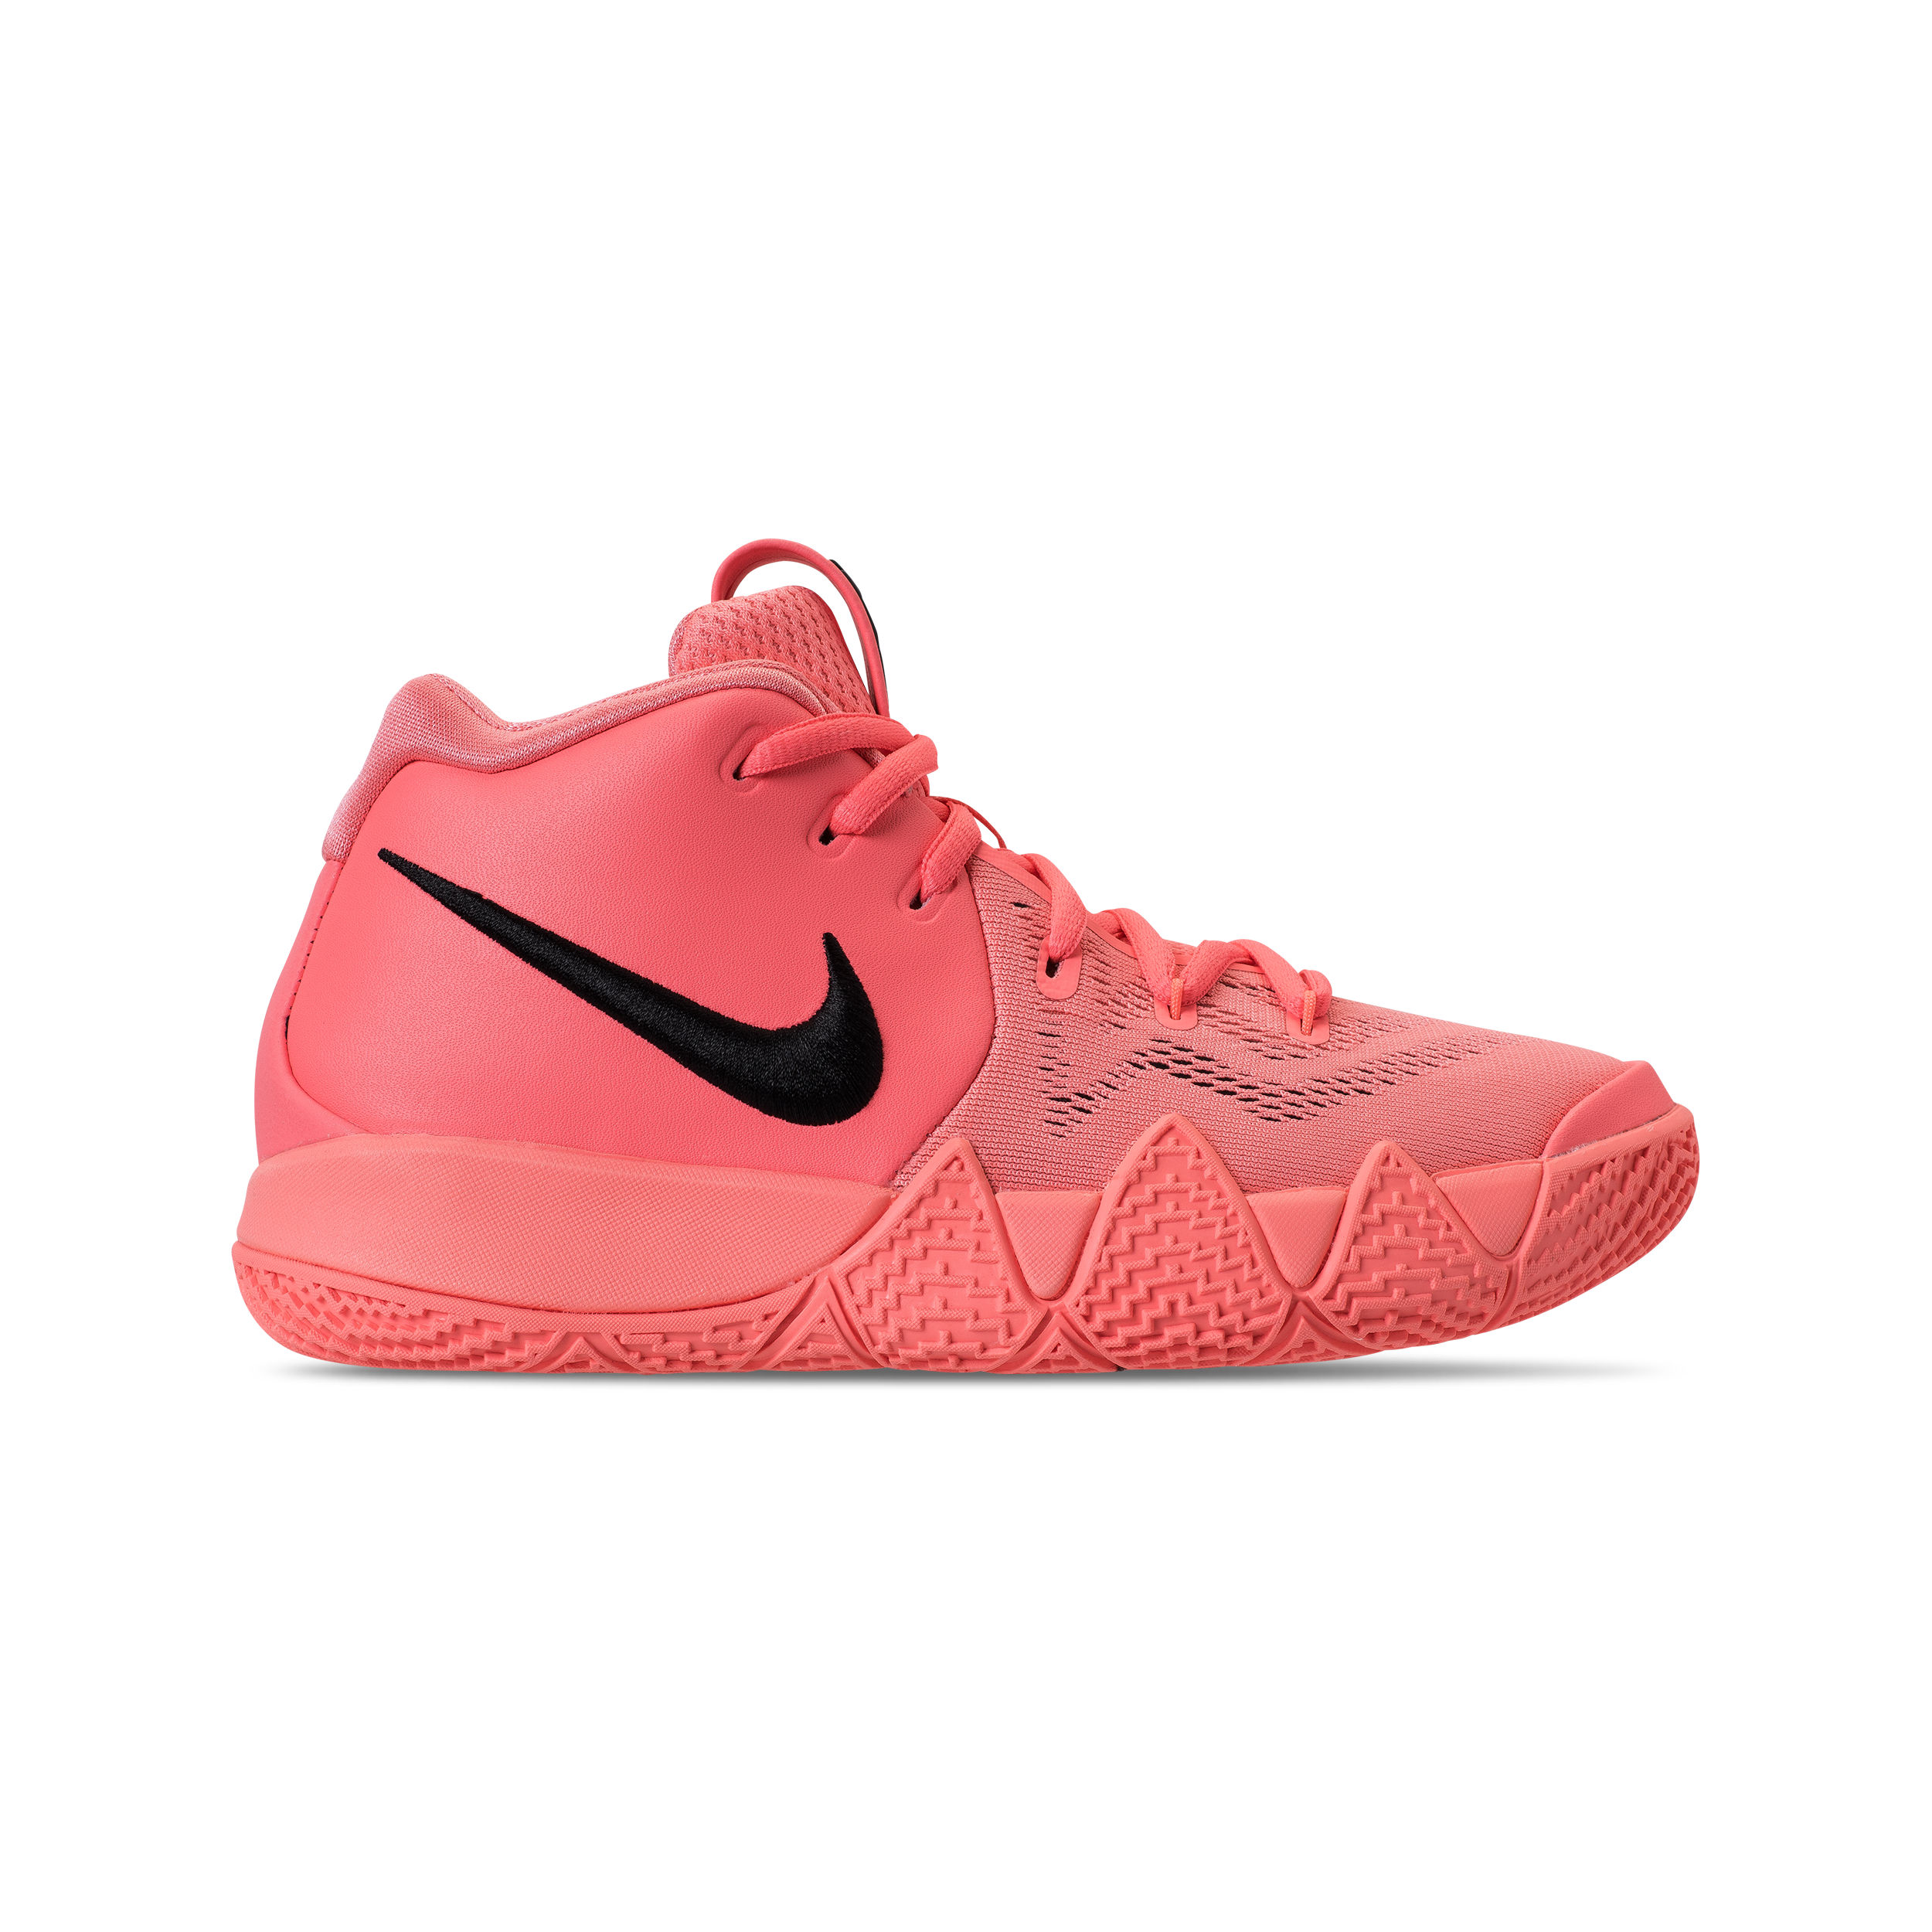 Nike Kyrie 4 Goes Atomic Pink for June 